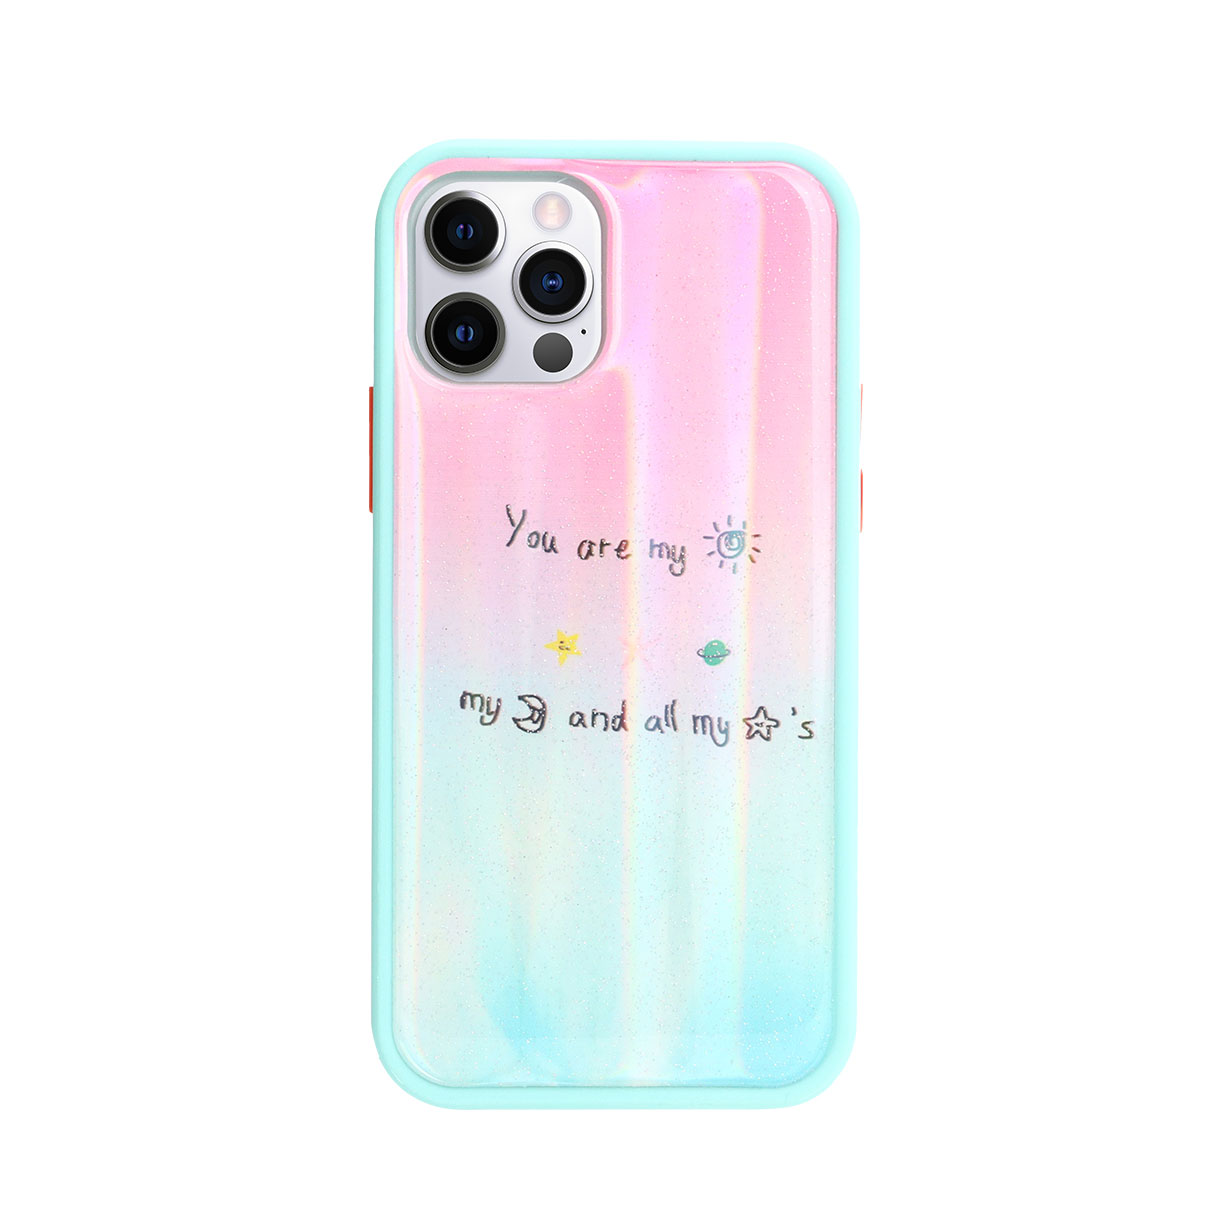 Shiny Glossy Design Armor Hybrid Protective Case for iPHONE 12 / 12 Pro 6.1 (You Are My Sunshine)